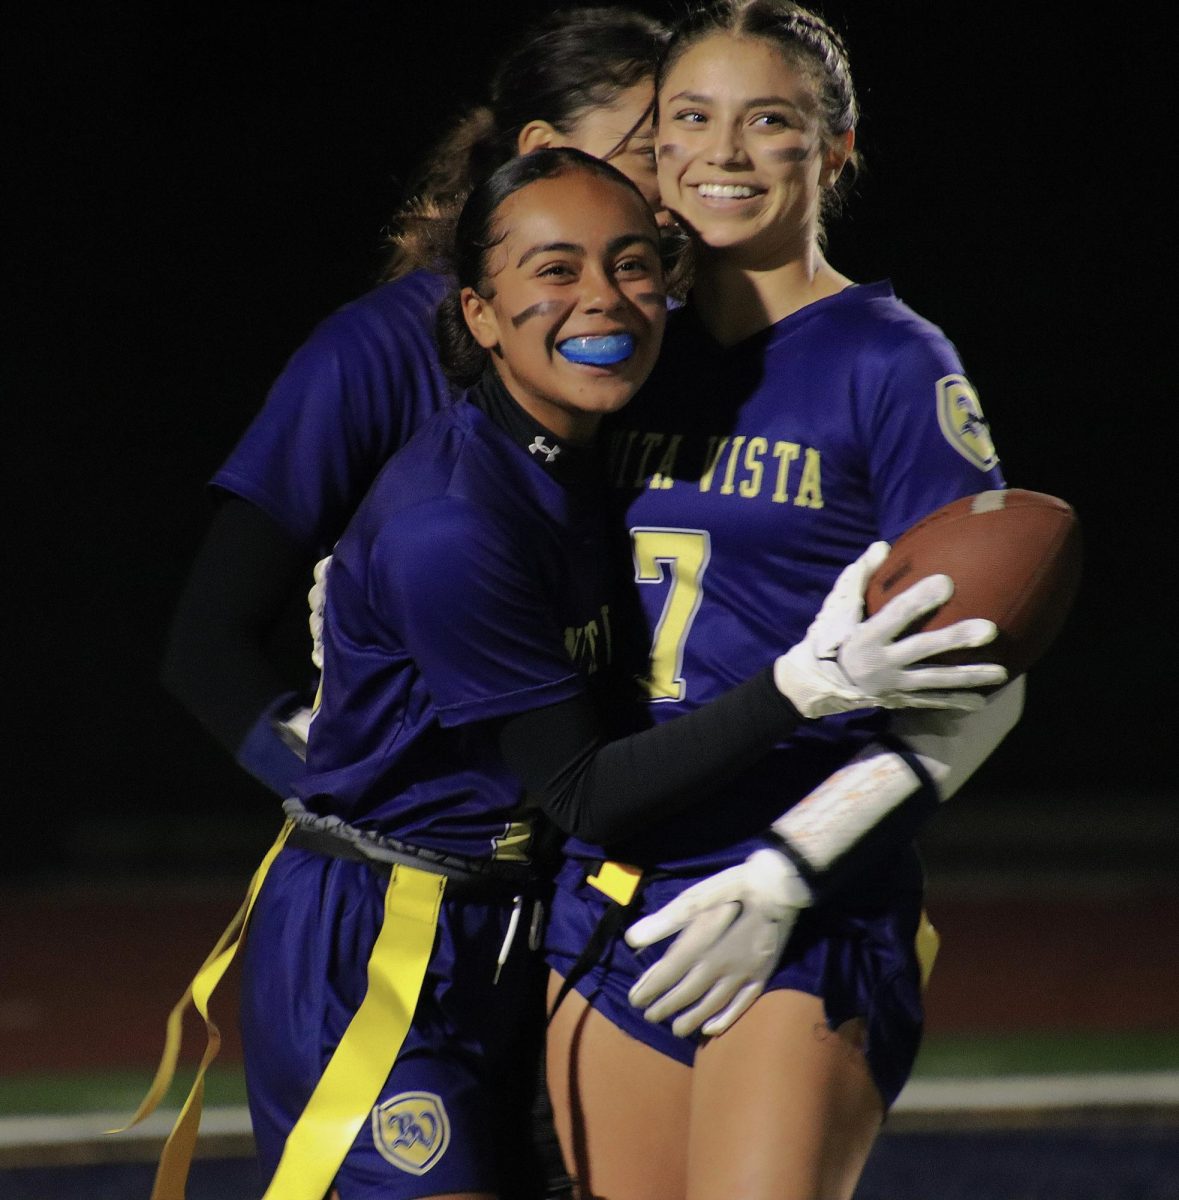 In the second half of the game, BVH wide receiver and freshman Sofia Garay (16) receives her first touchdown of the night, celebrating with BVH linebacker, wide receiver and senior Lucia Quintero (7). Garay has a big impact on the Lady Barons offense by catching passes that torch the bulldogs defense.